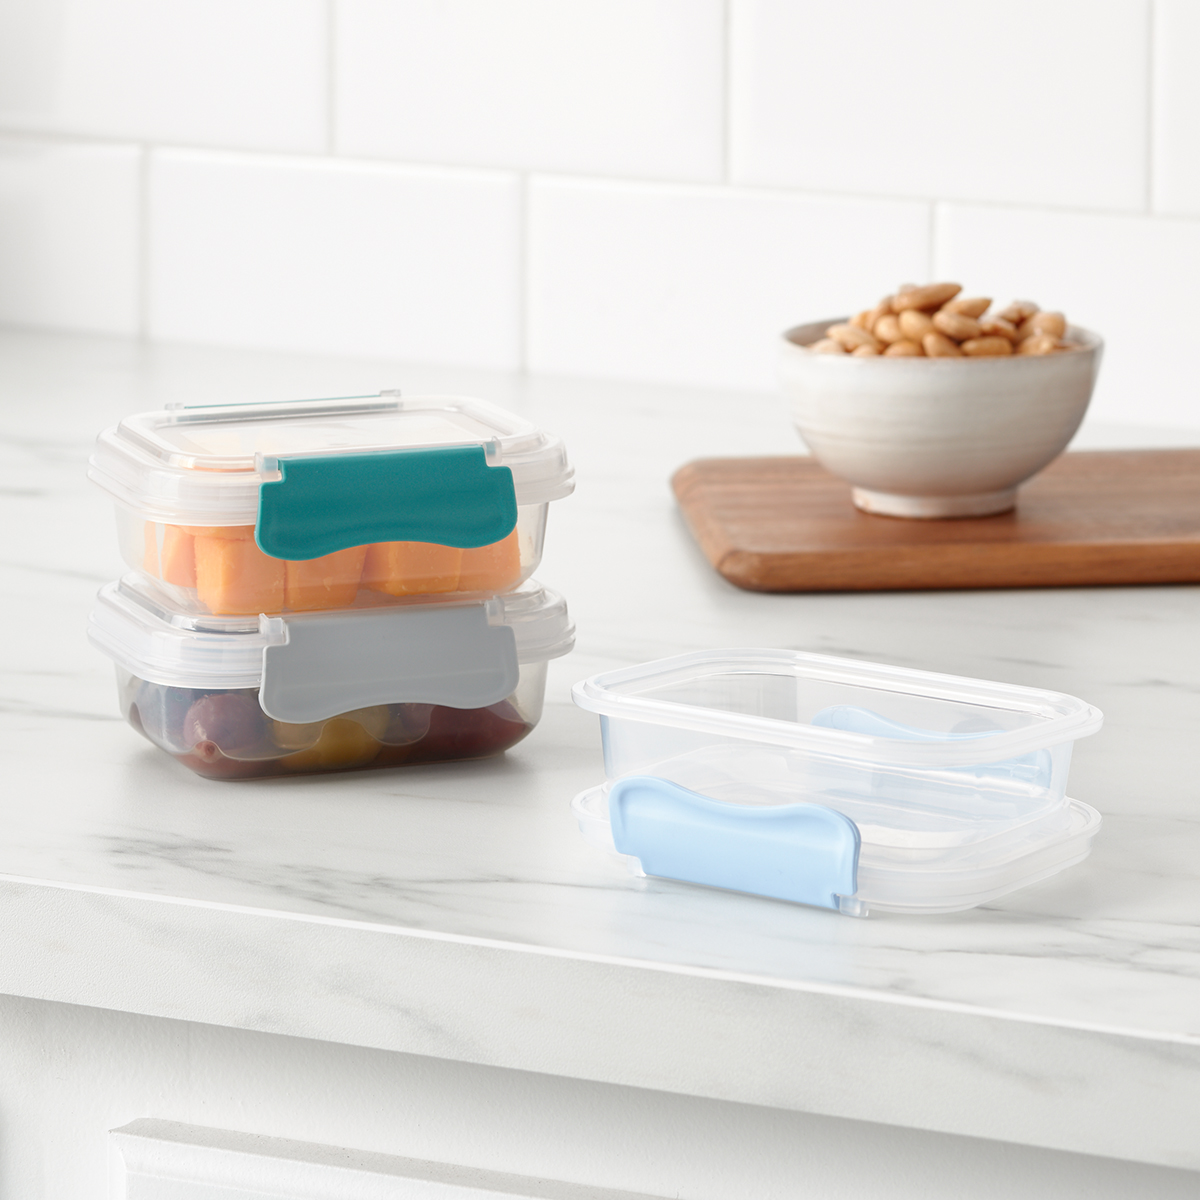 https://www.containerstore.com/catalogimages/416502/10083930g-6.8oz-food-storage-contain.jpg